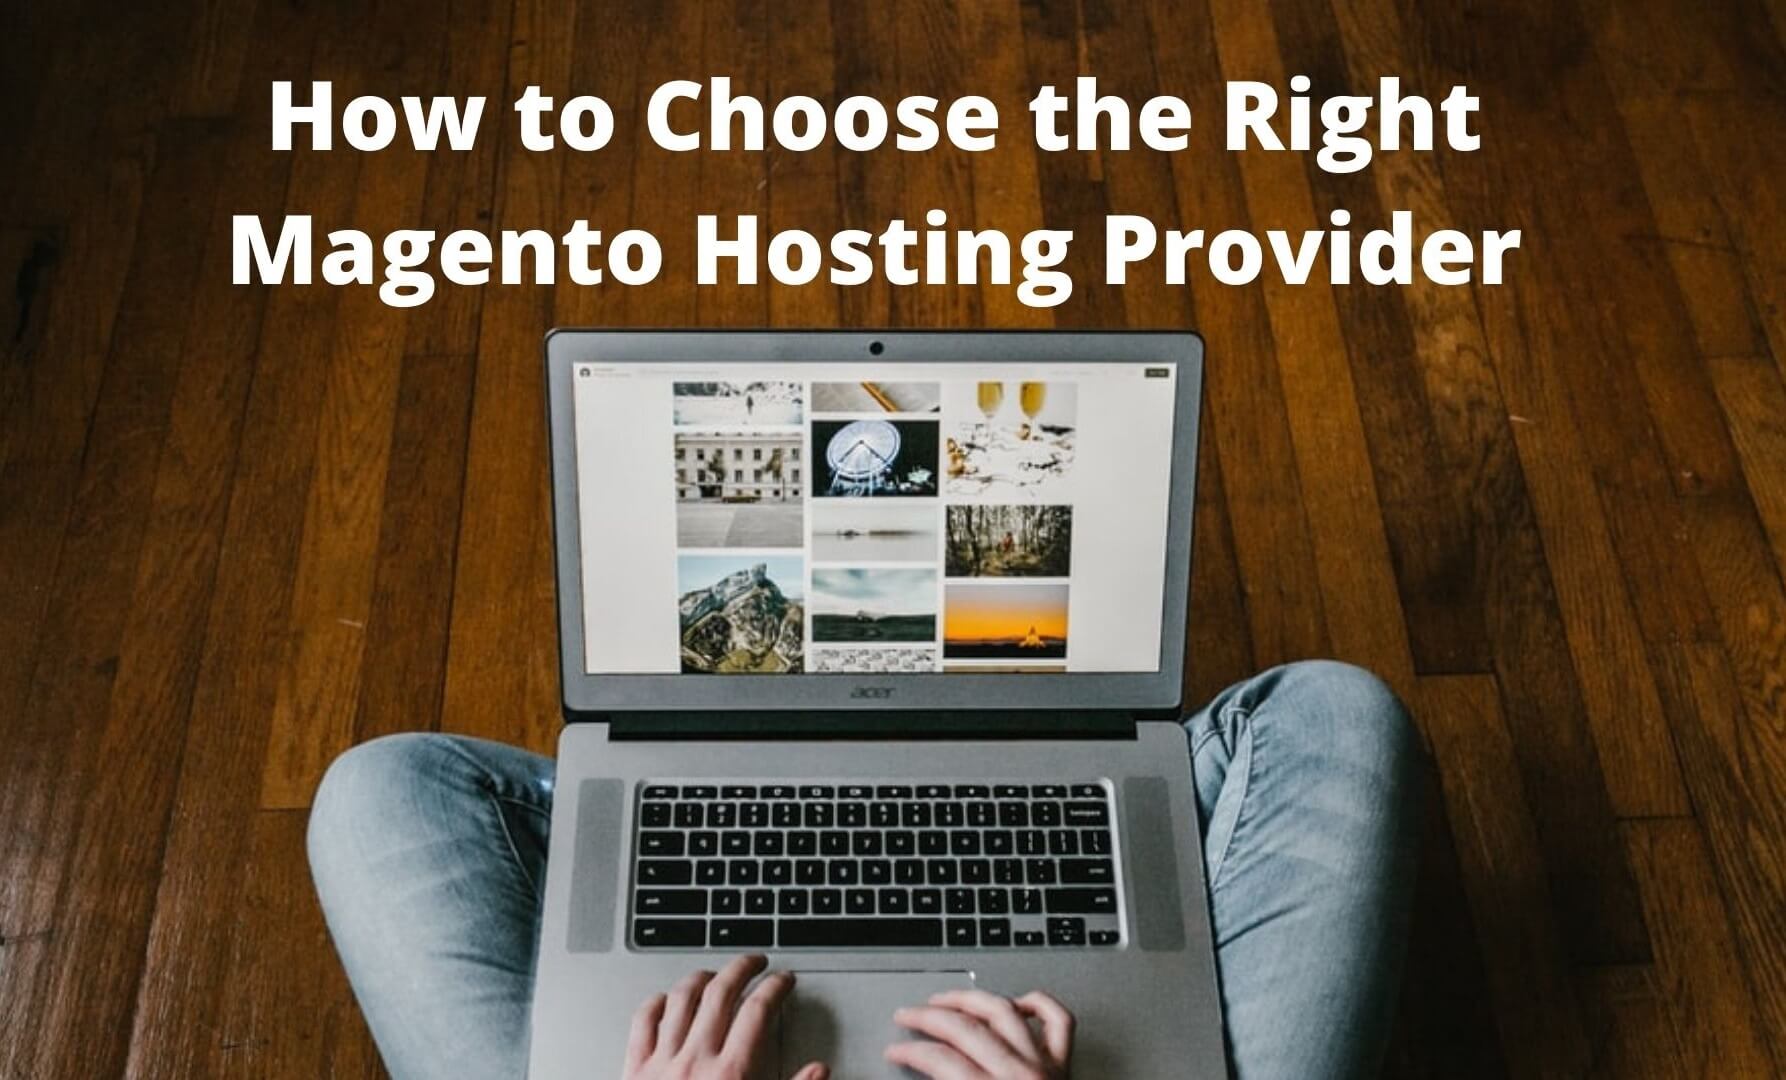 How-to-Choose-the-Right-Magento-Hosting-Provider-1